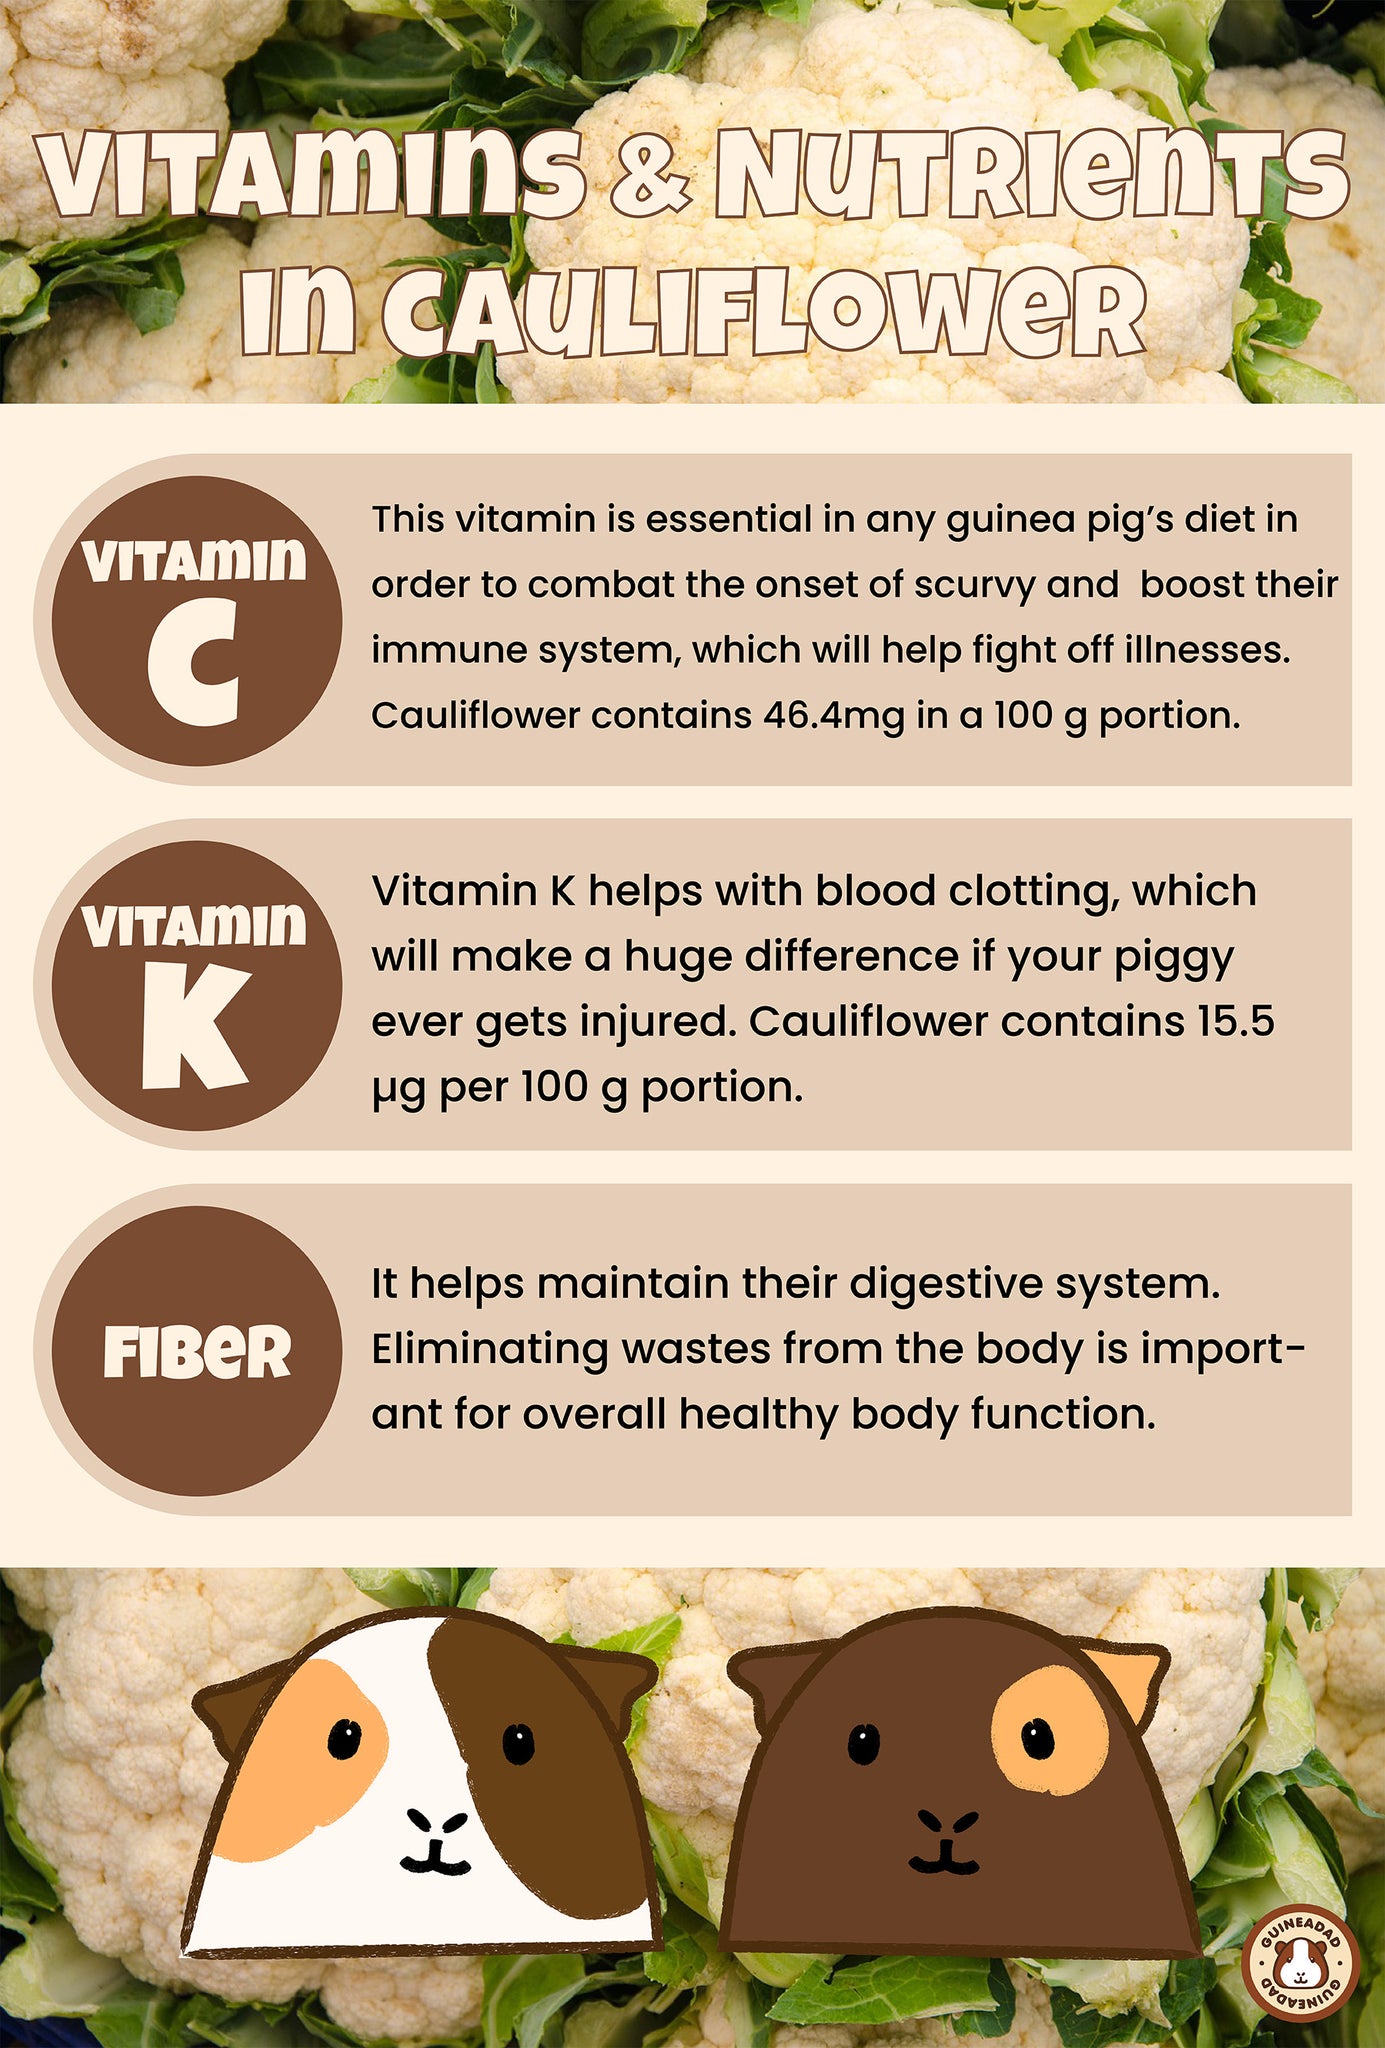 Infographic displaying the vitamins and nutrients in cauliflower for guinea pigs